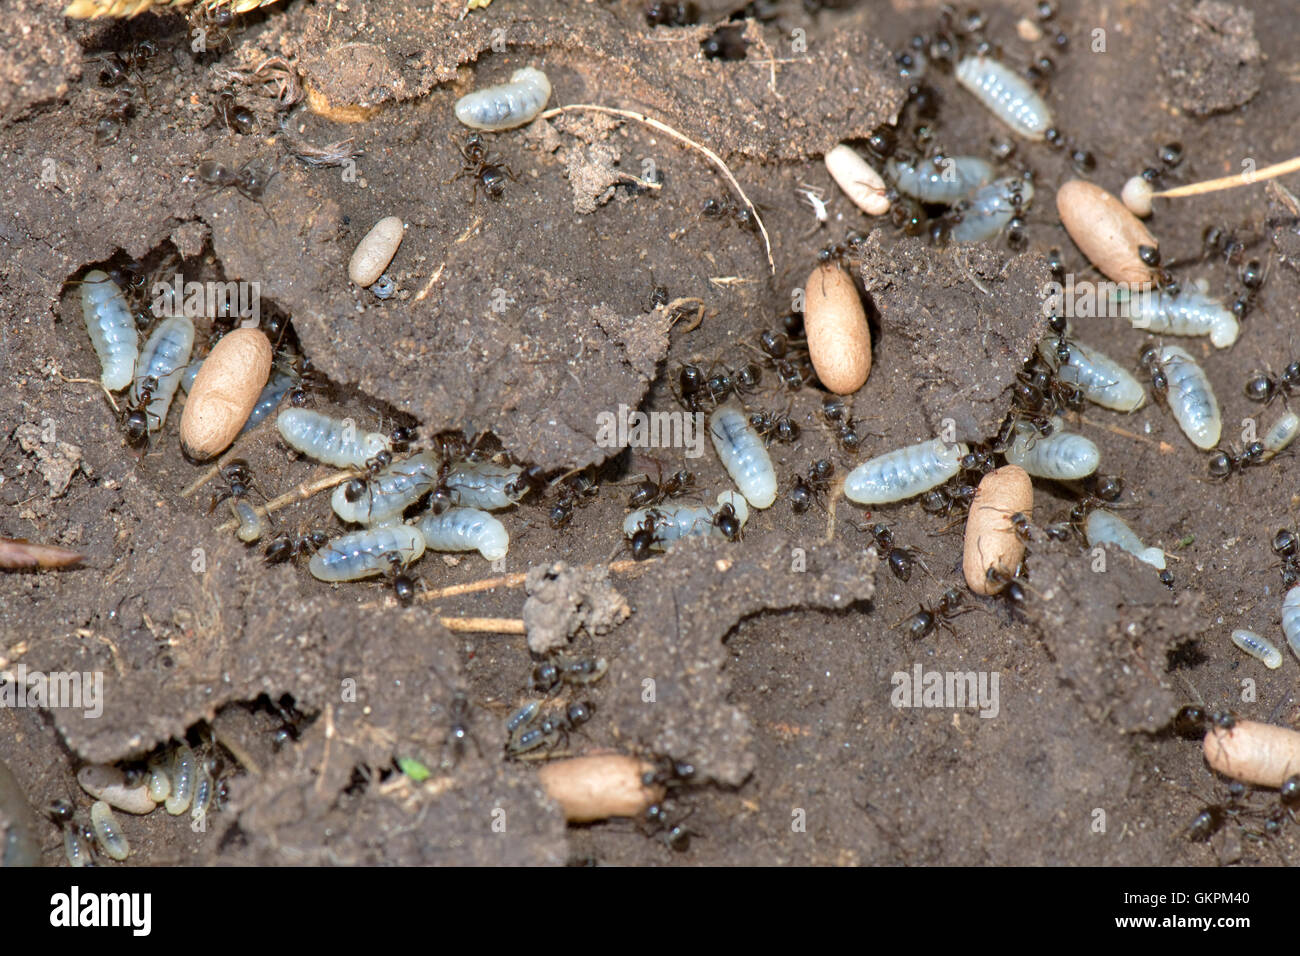 Exposed nest of black garden ants, Lasius niger, with workers, larvae and cocoons in tunnels Stock Photo